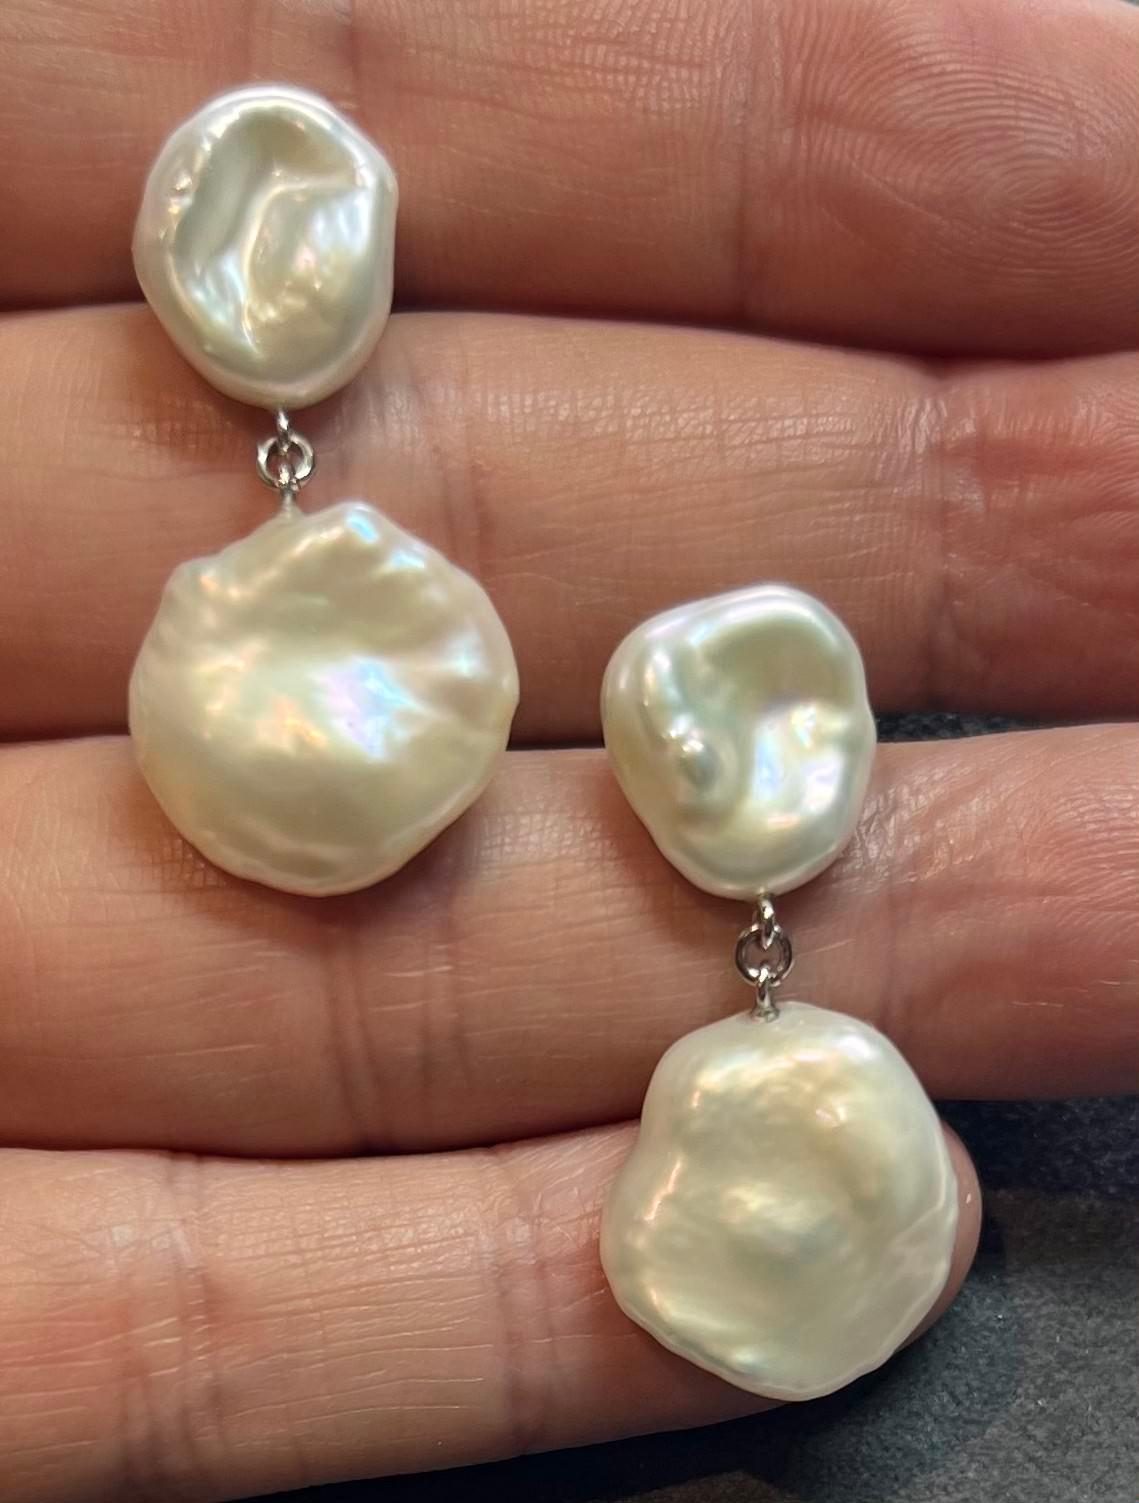 Fine Quality Fresh Water Pearl Dangle Earrings 14k White Gold Certified $799 018542

This is one of Kind Unique Custom Made Glamorous Piece of Jewelry!

Nothing says, “I Love you” more than Diamonds and Pearls!

This item has been Certified,